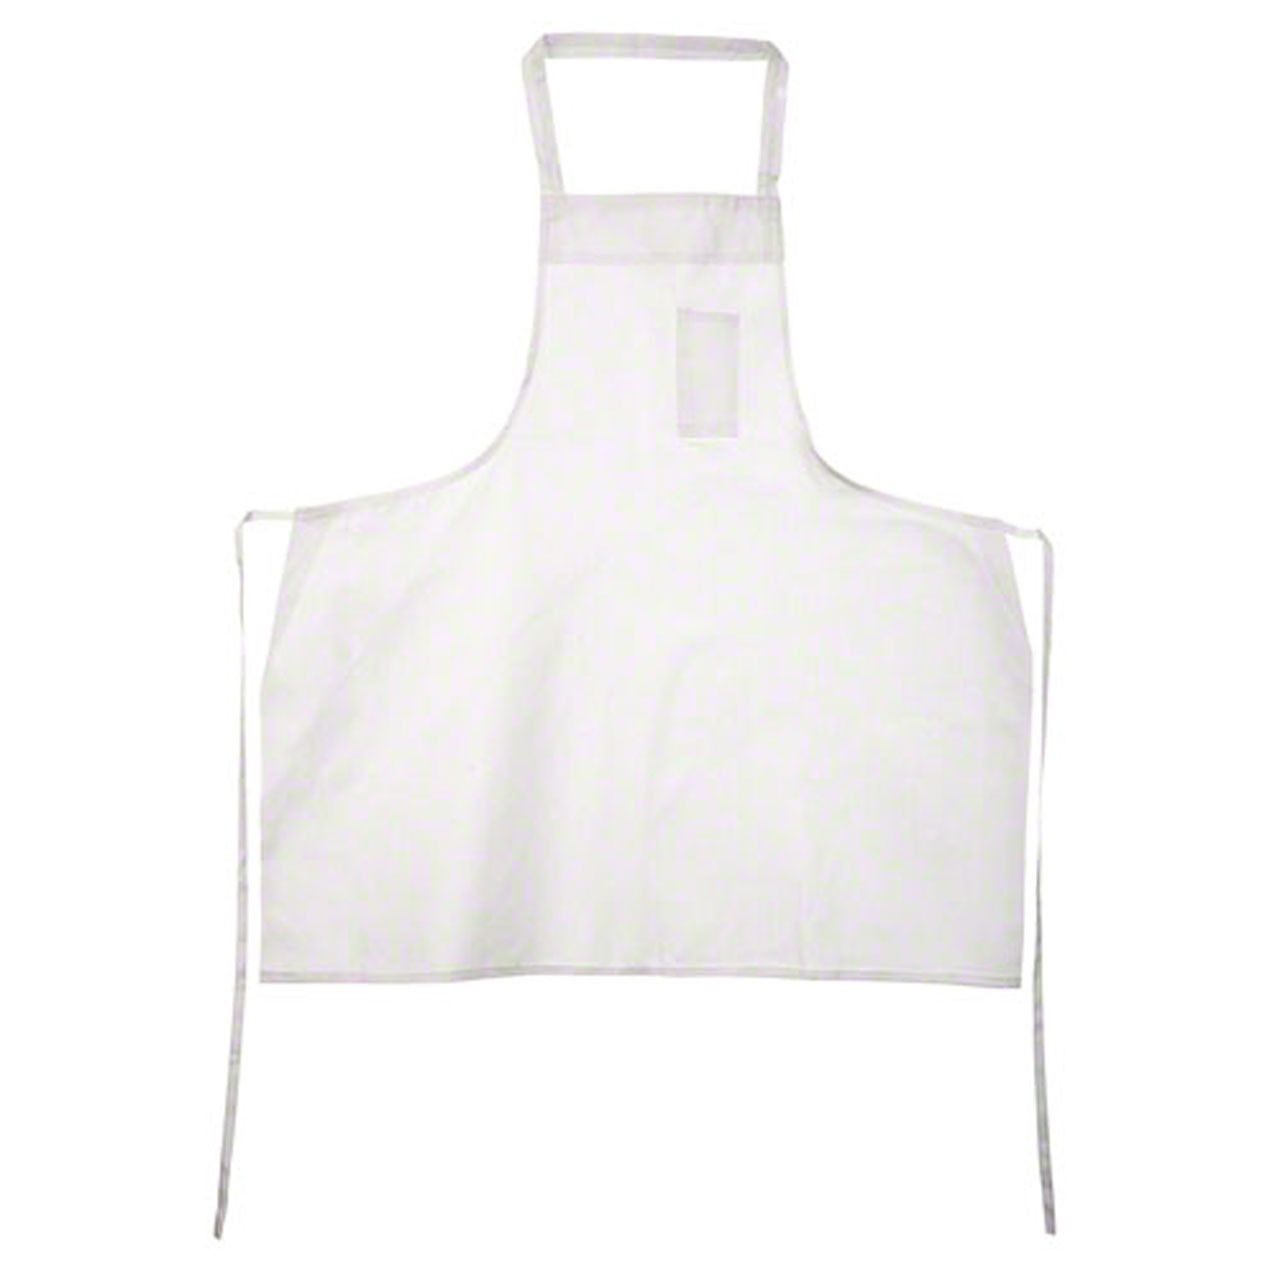 White Economy Bib Aprons, Twill Weave, 65/35 Questions & Answers